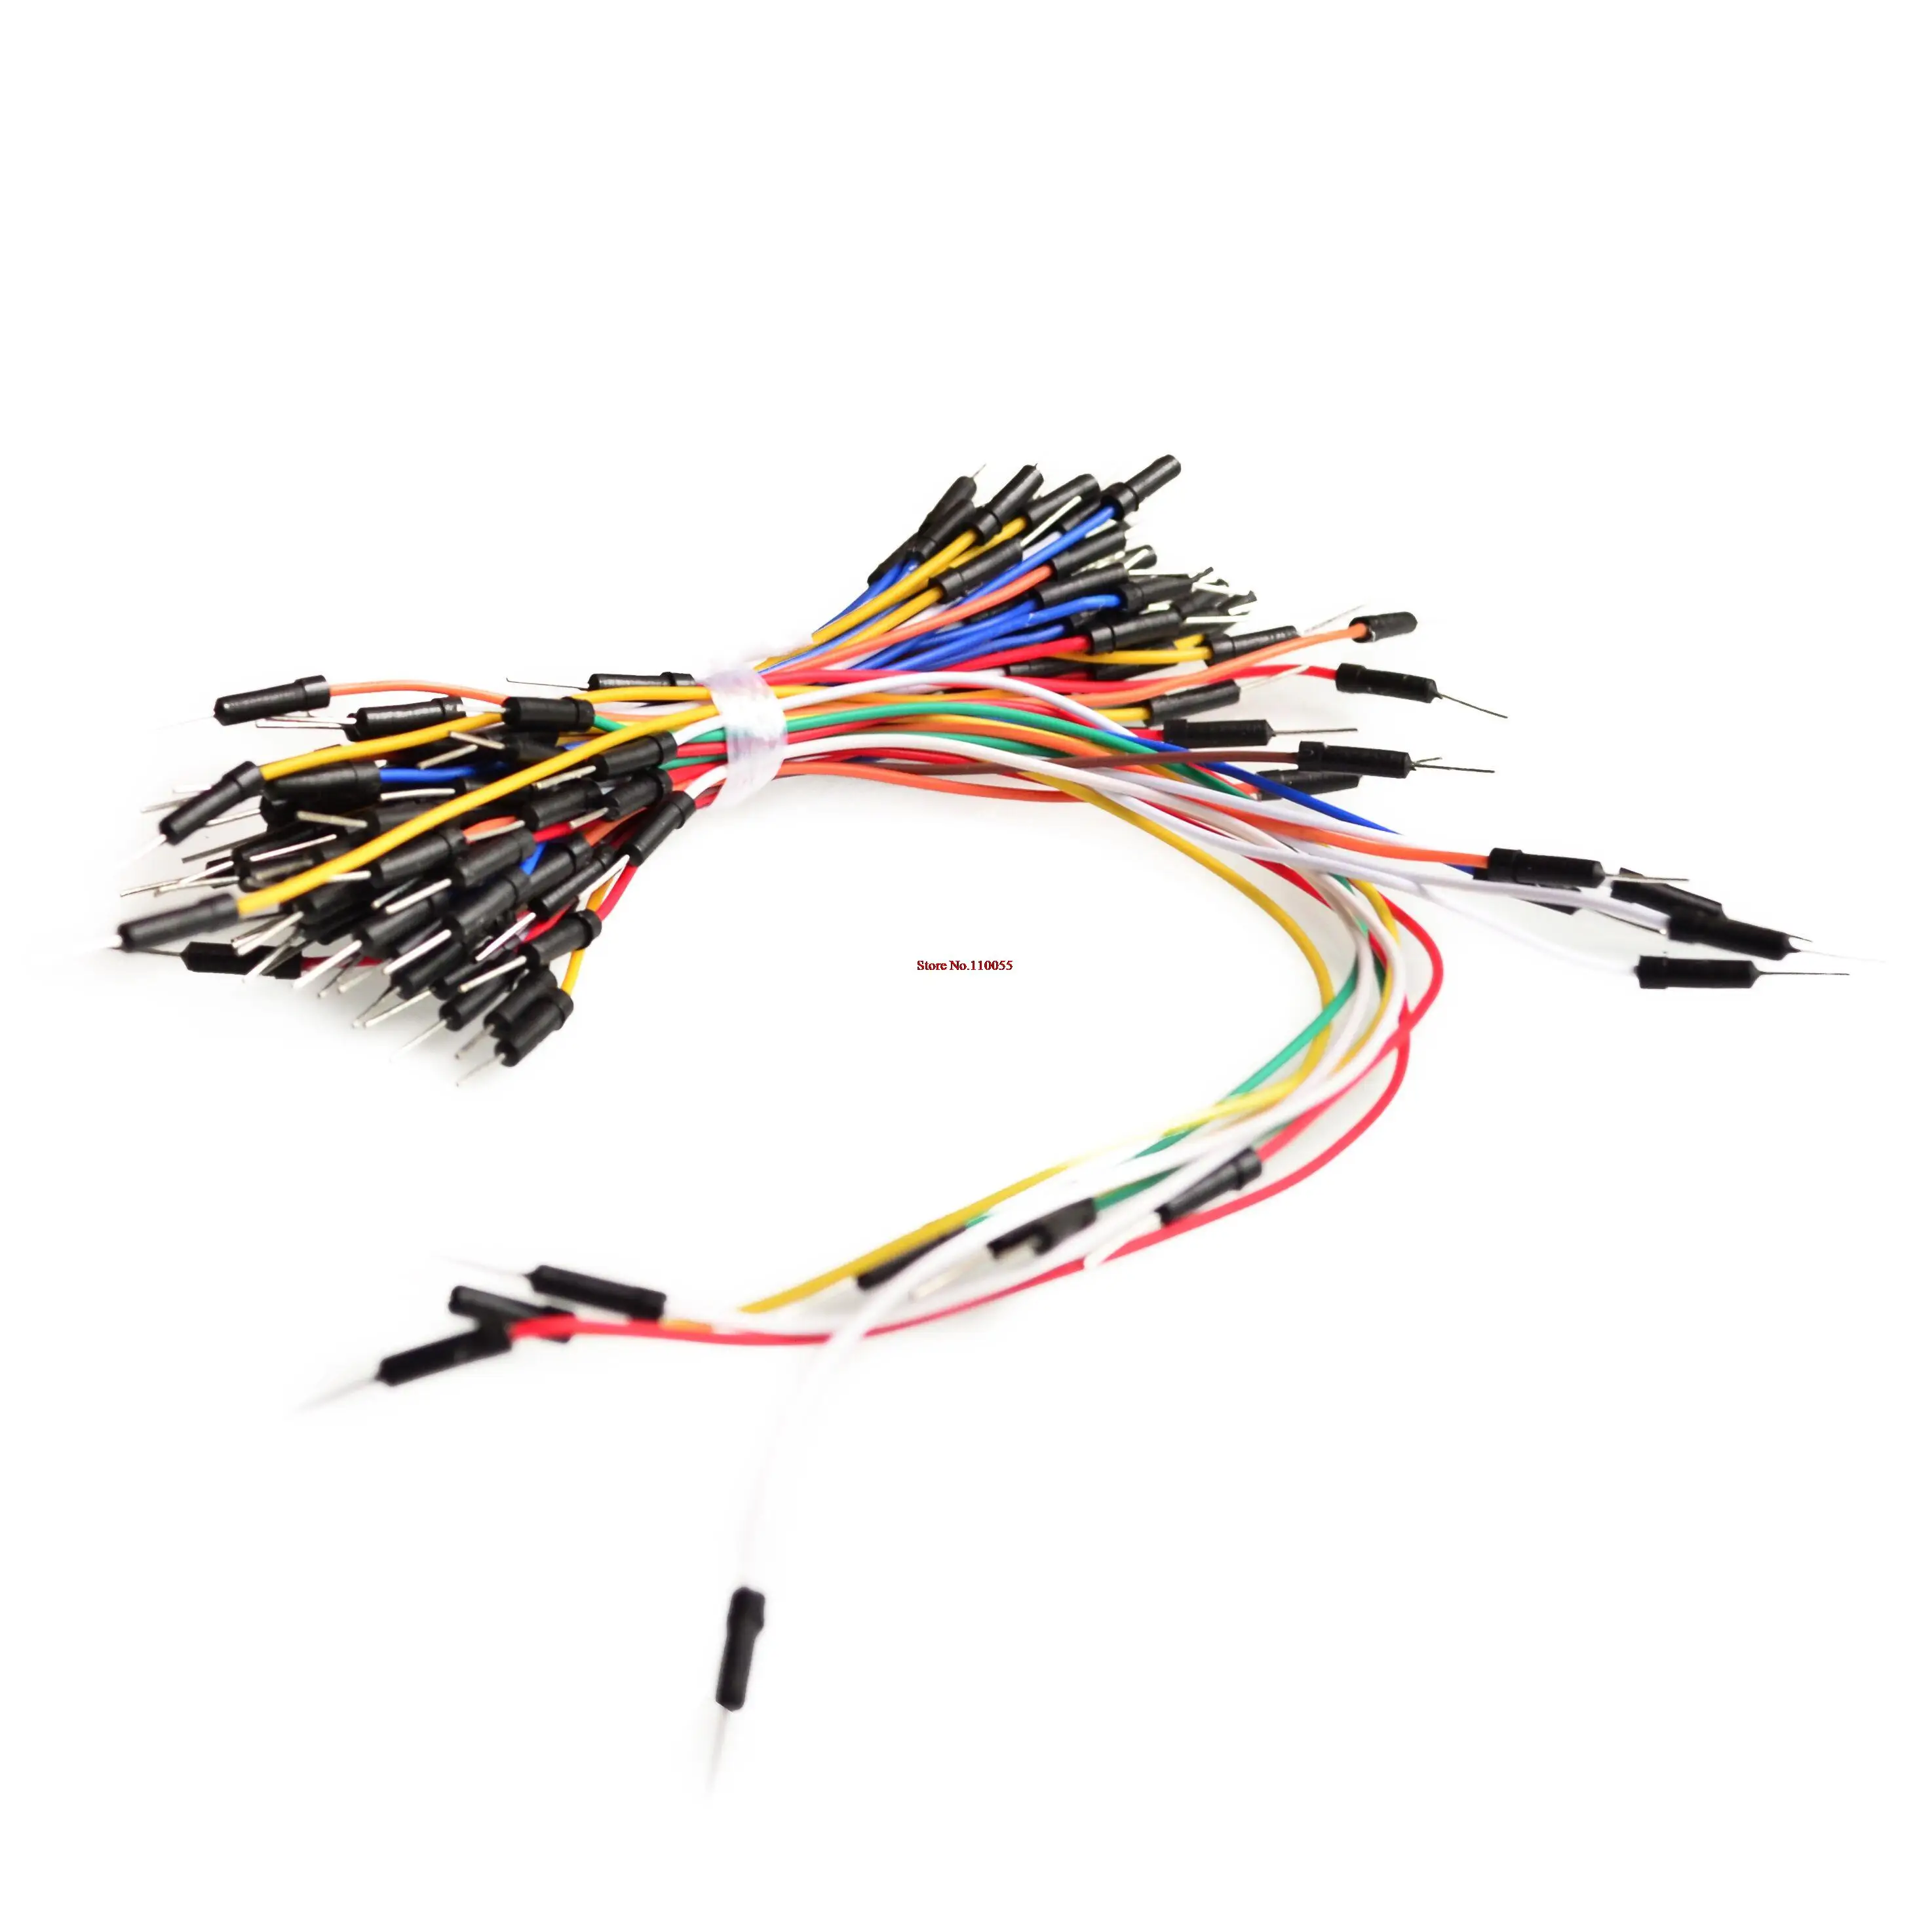 Details about   65pcs male to male solderless flexible breadboard jumper cable wires for ardN_cb 